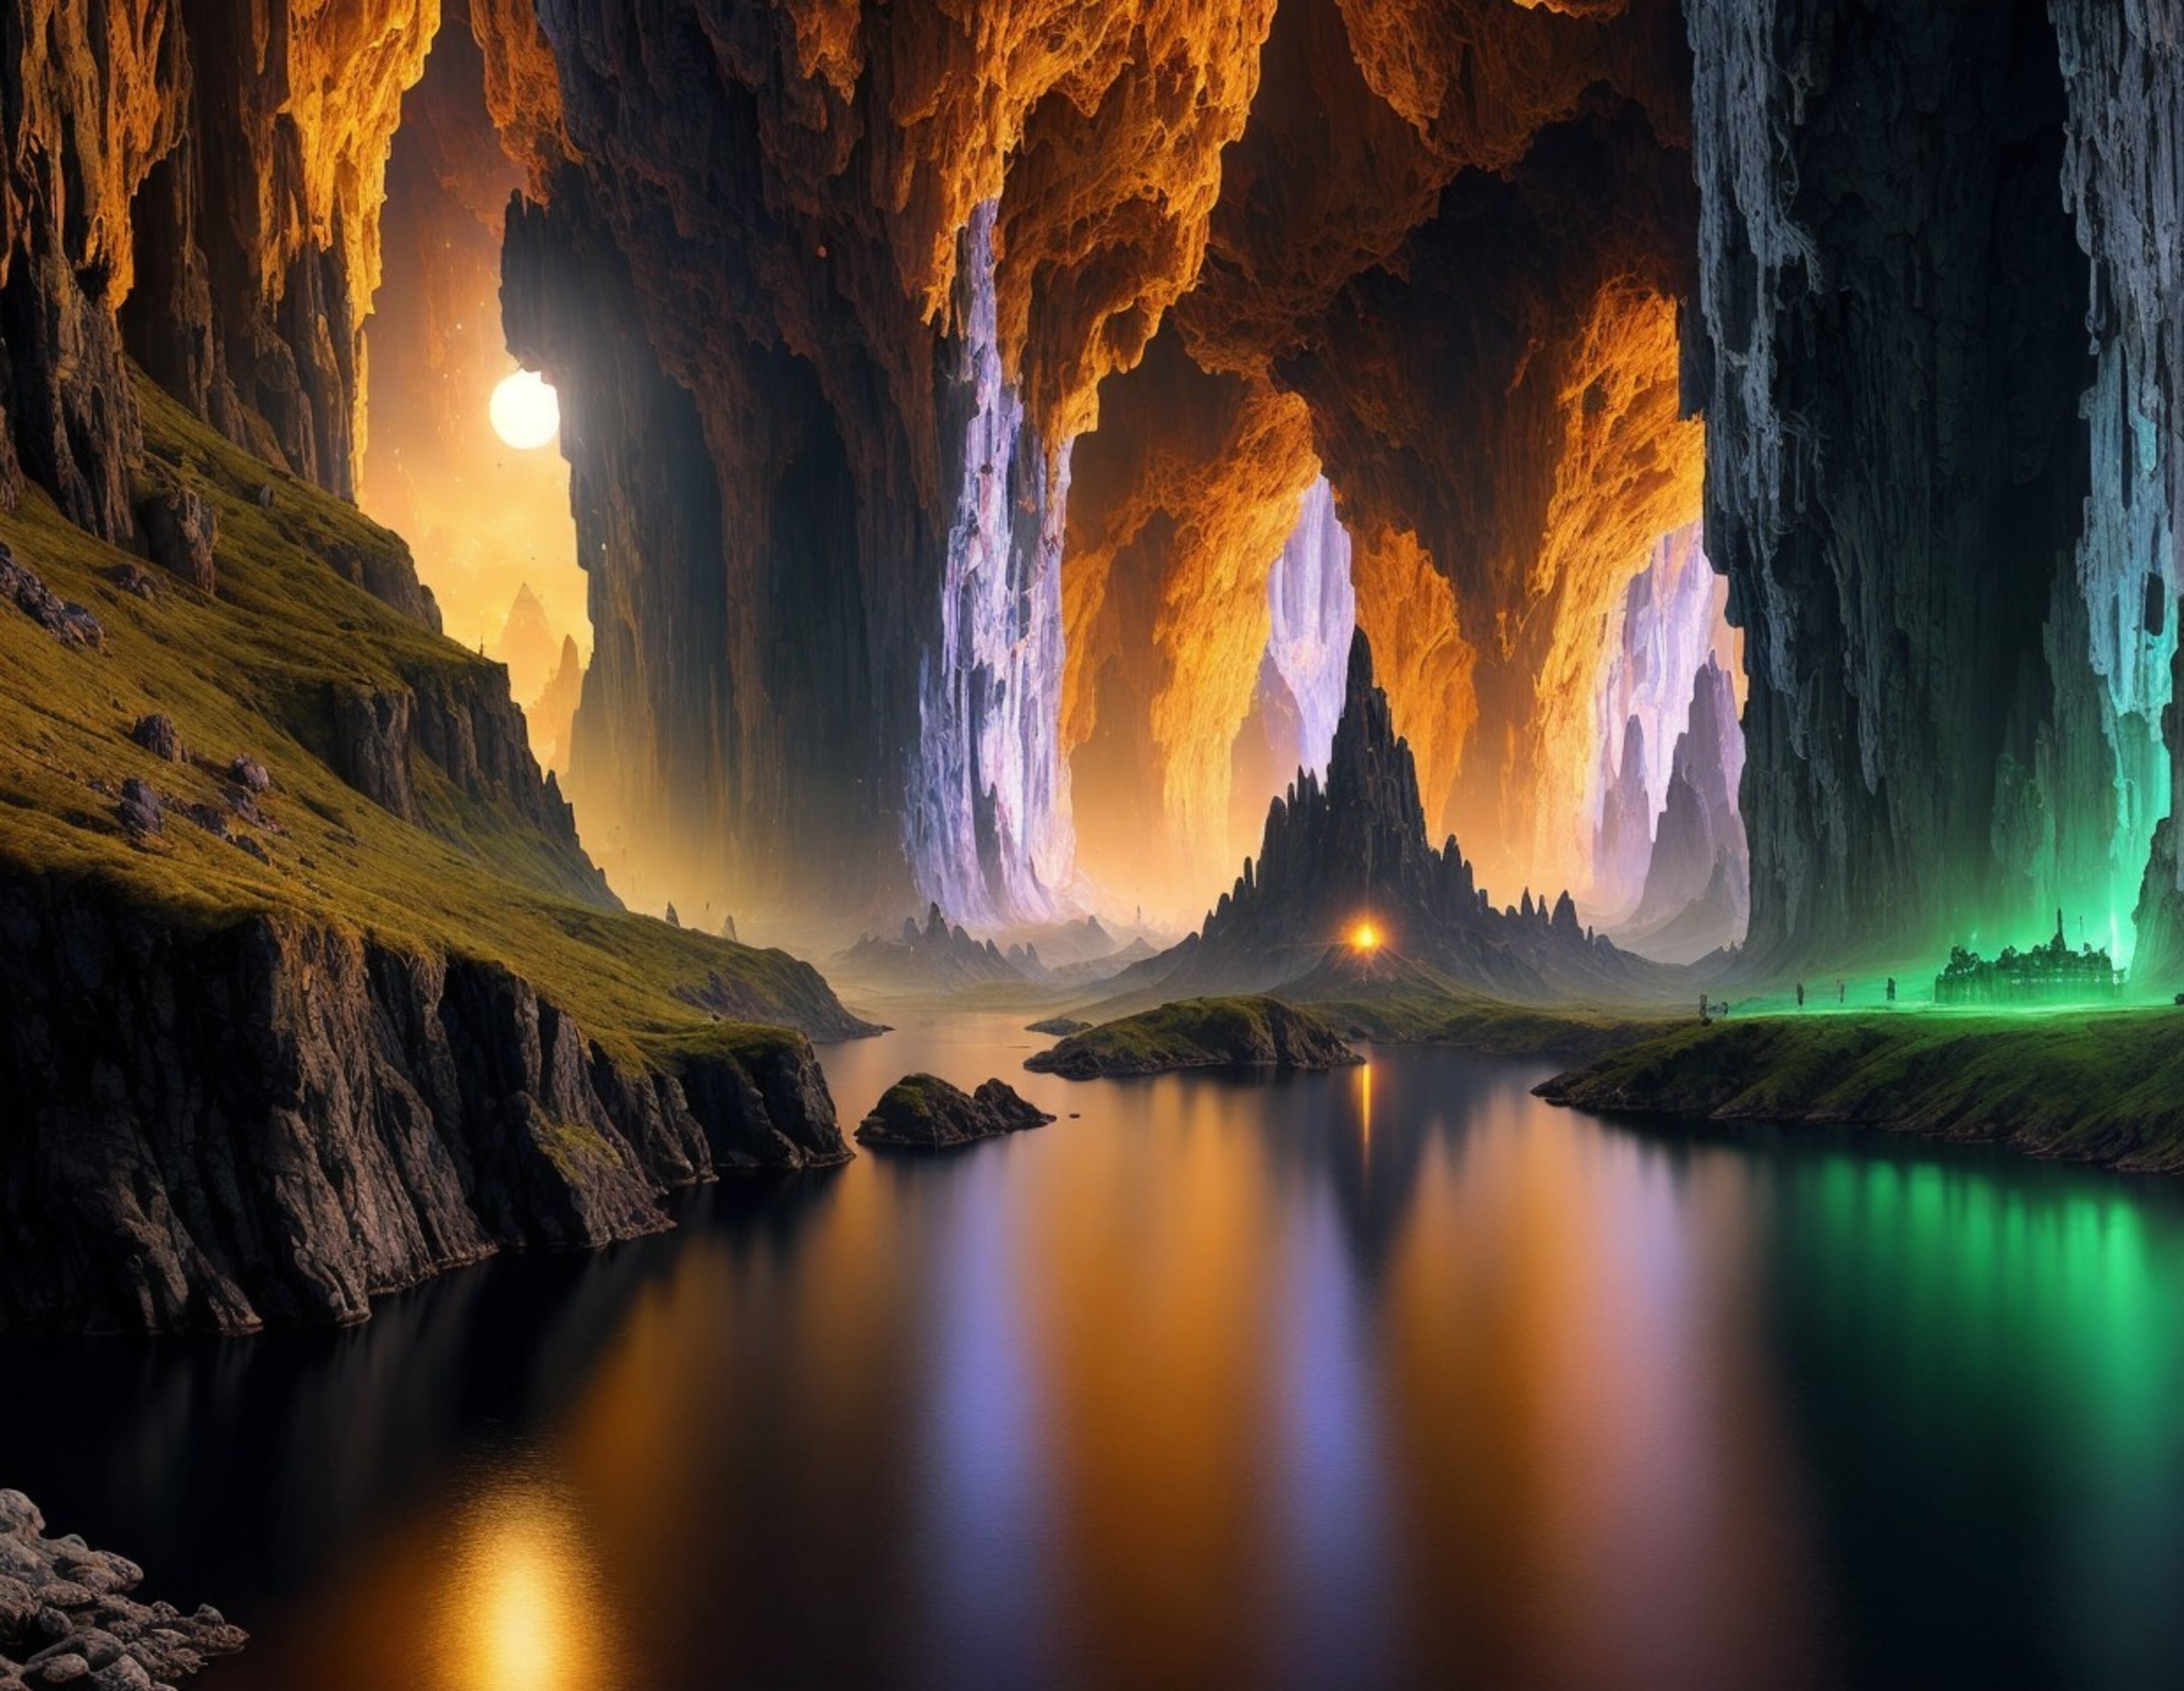 Fantastic cave by the water